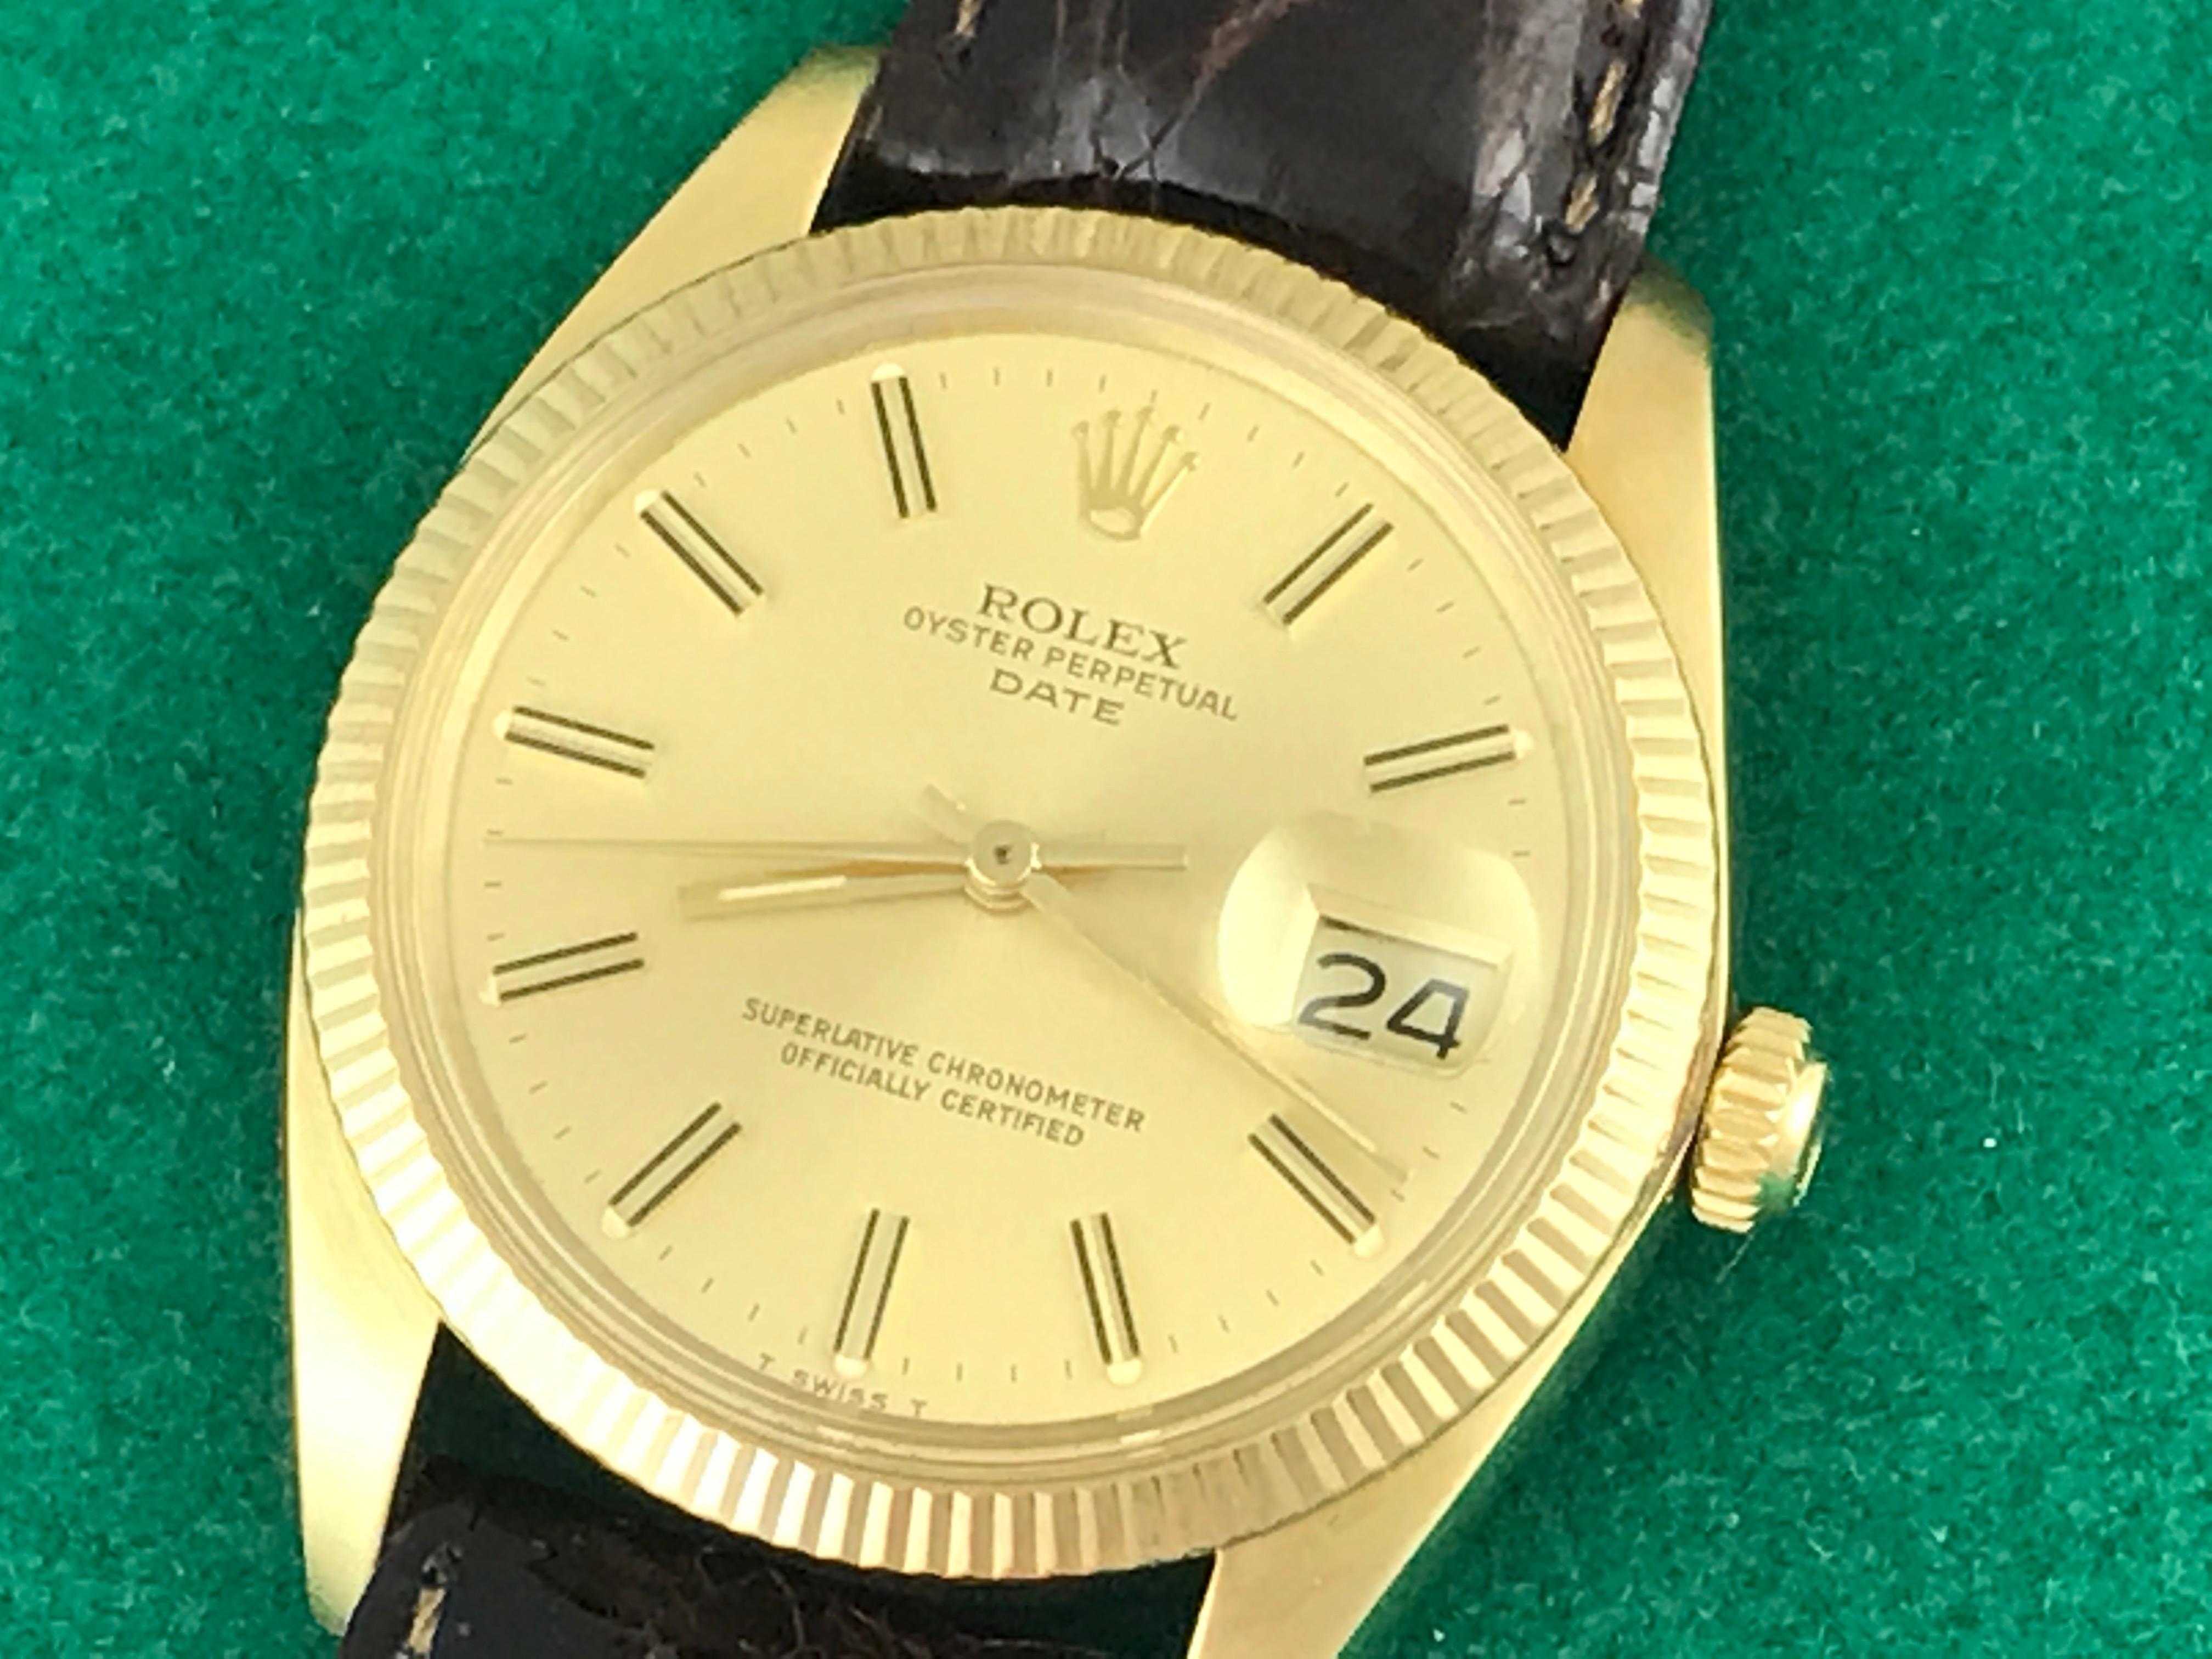 The Rolex Date Model 1503 pre-owned men's automatic wrist watch. Featuring a champagne dial with yellow gold hour markers and stainless steel case with 14K yellow gold fluted bezel. Measures 34mm. Comes with a dark brown alligator strap, box,